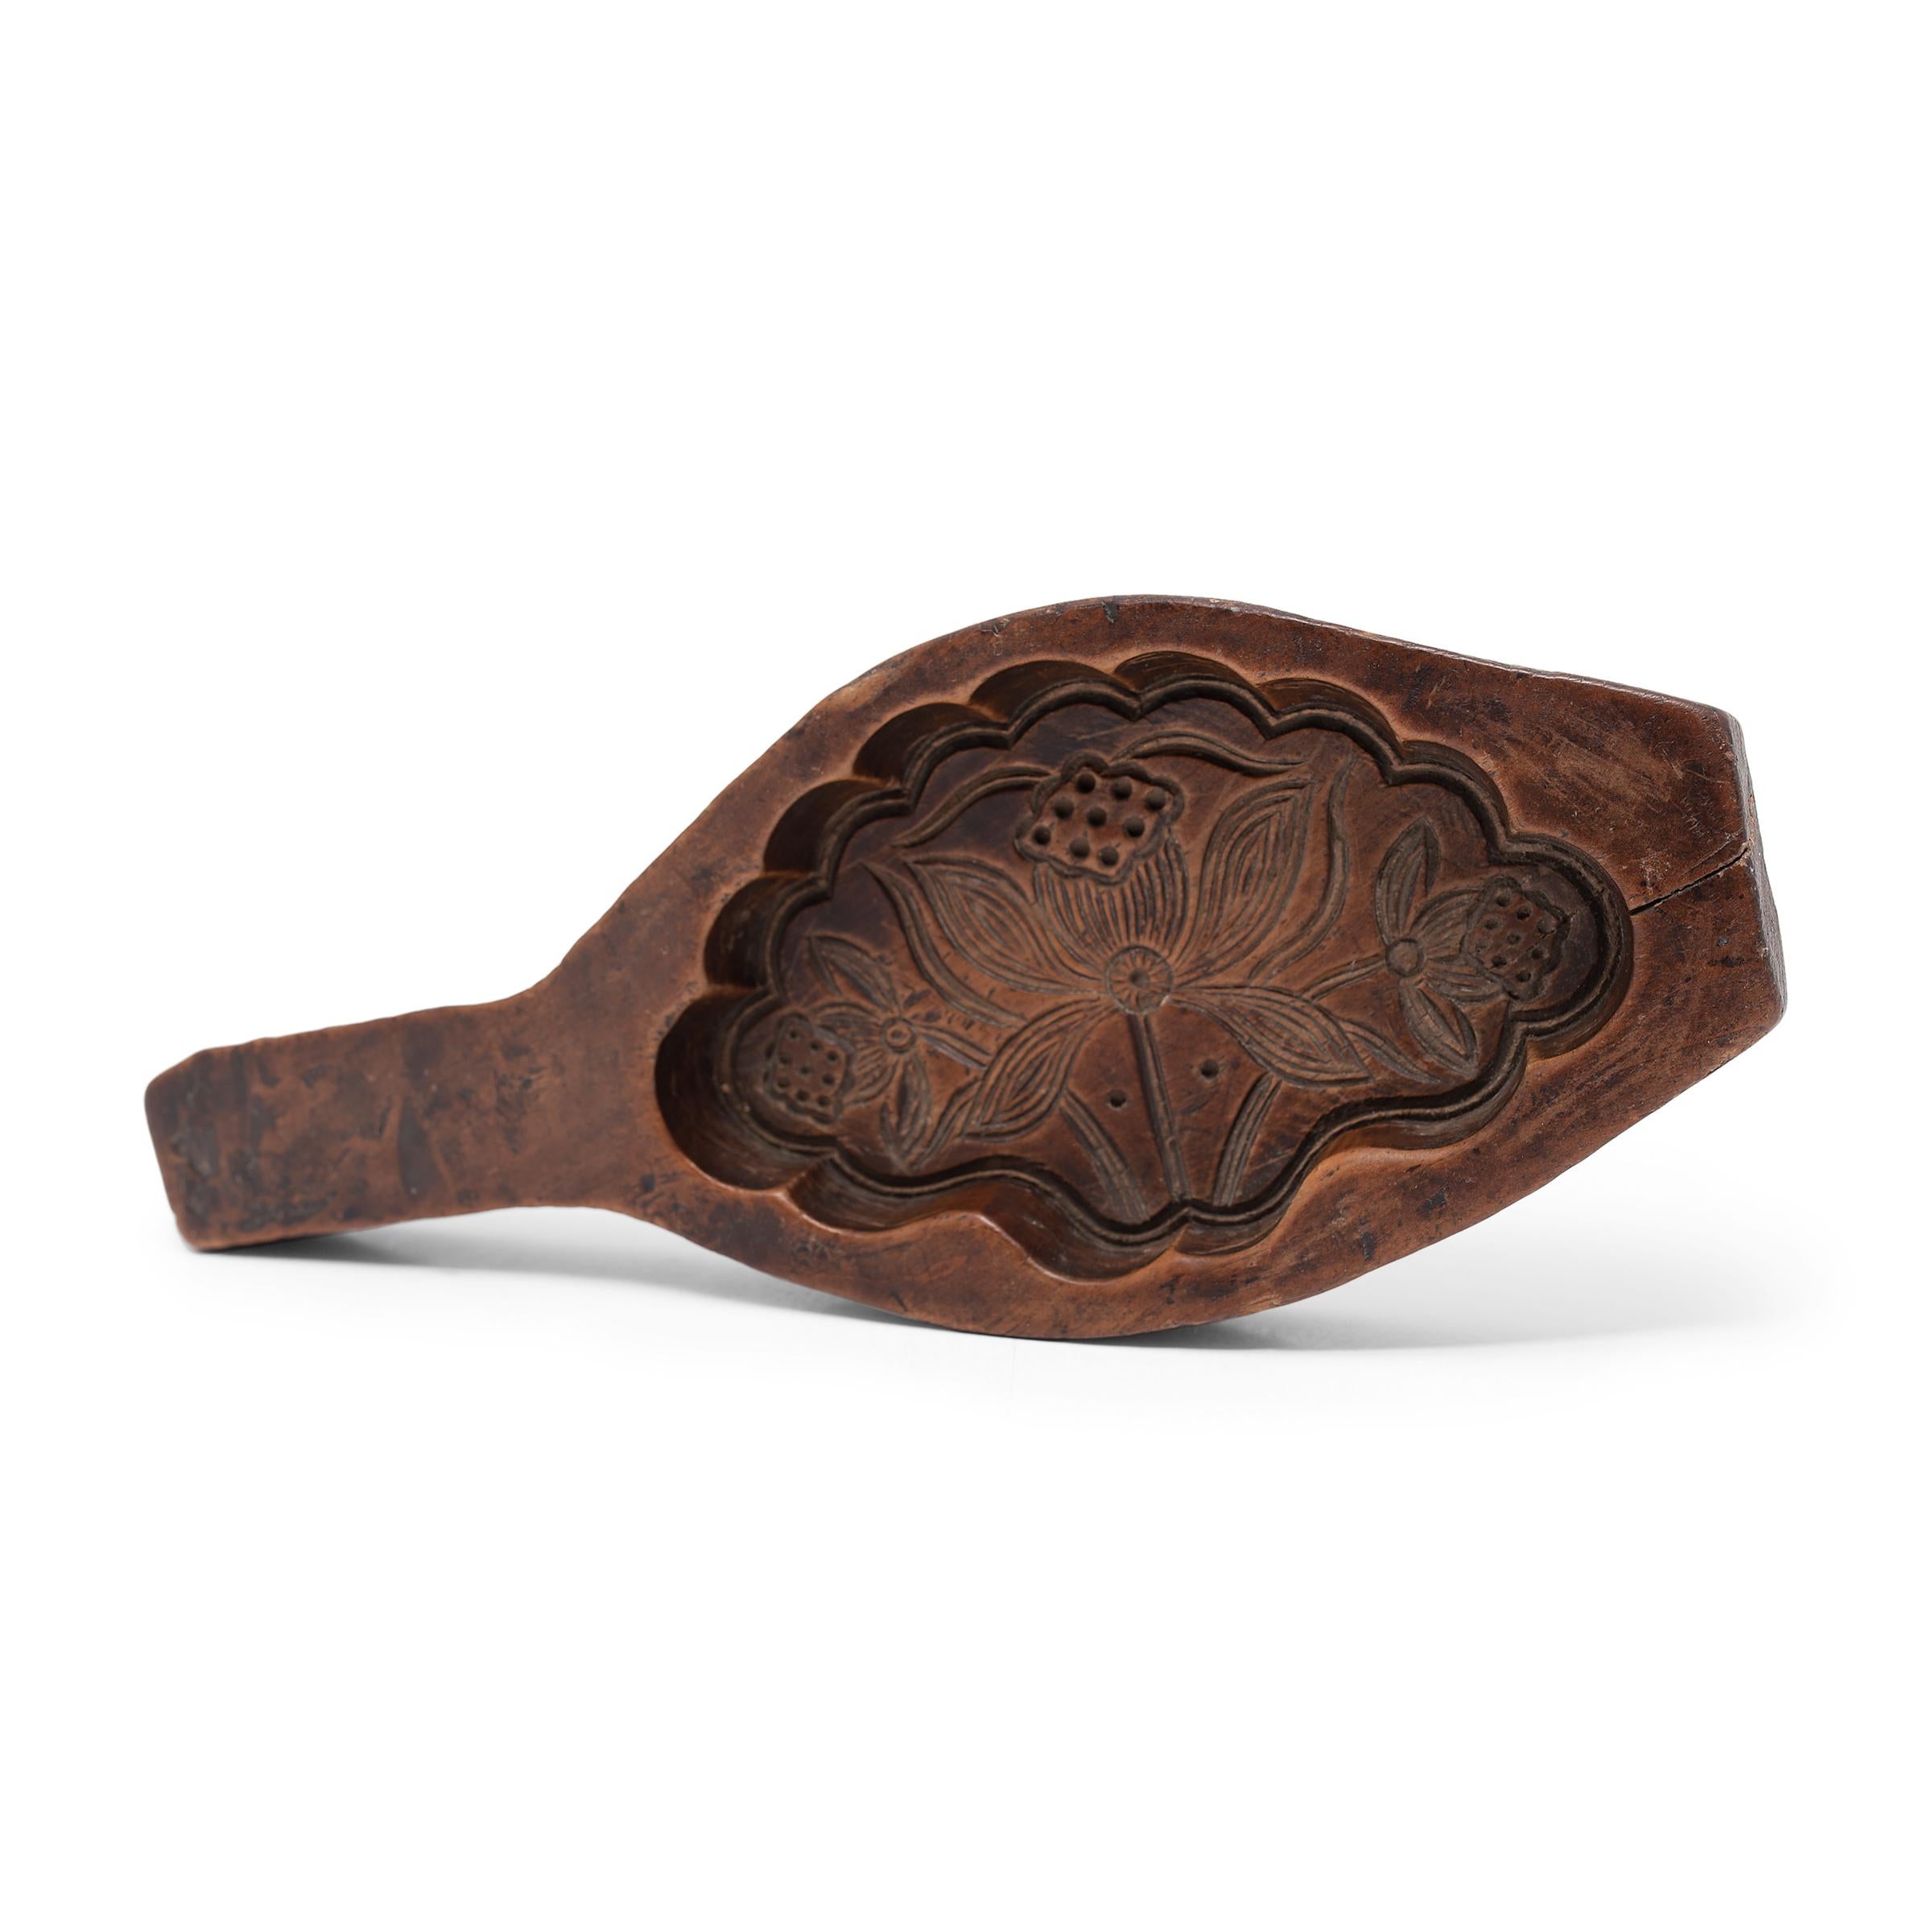 This 19th-century hand-held wood press is carved with a large mold used for shaping festive mooncakes. Packed with lotus root, red bean, or other regional fillings, mooncakes are a delicacy eaten during the Mid-Autumn Festival as an offering between